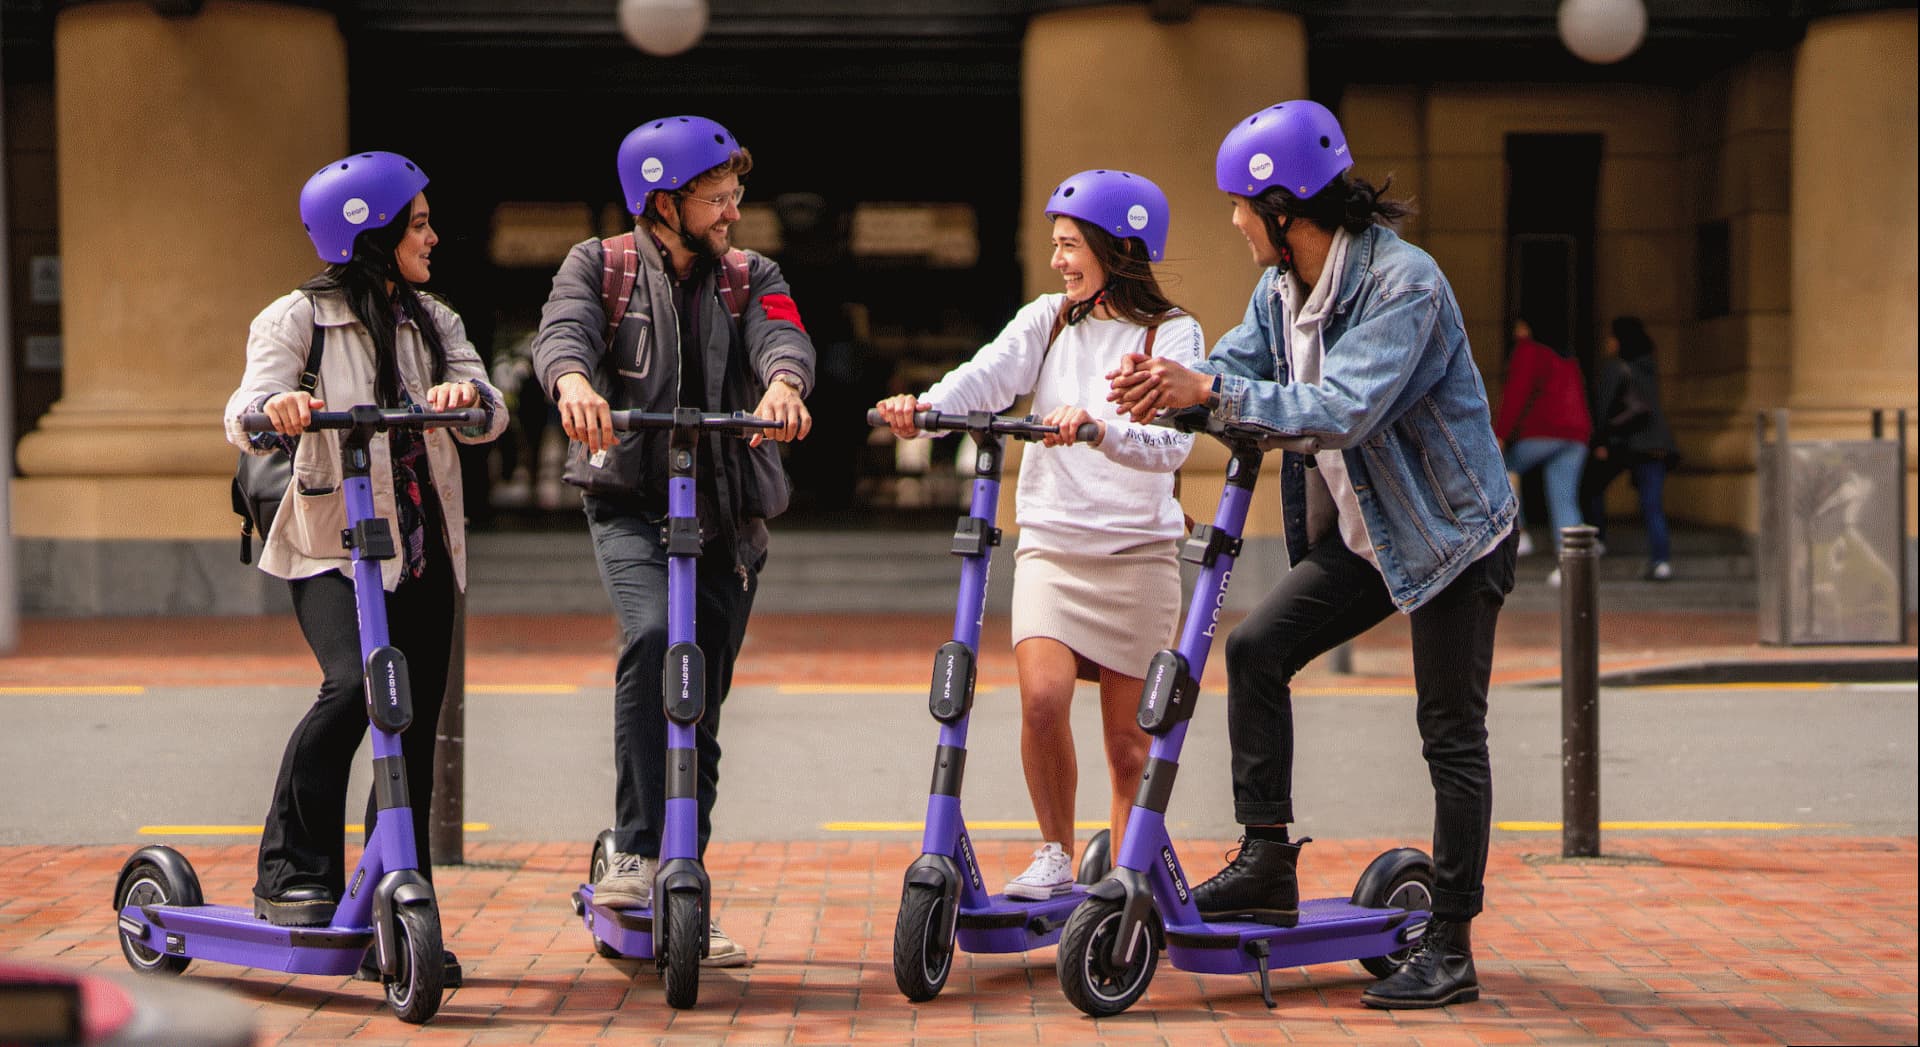 Group of people riding rentable electric scooters. 